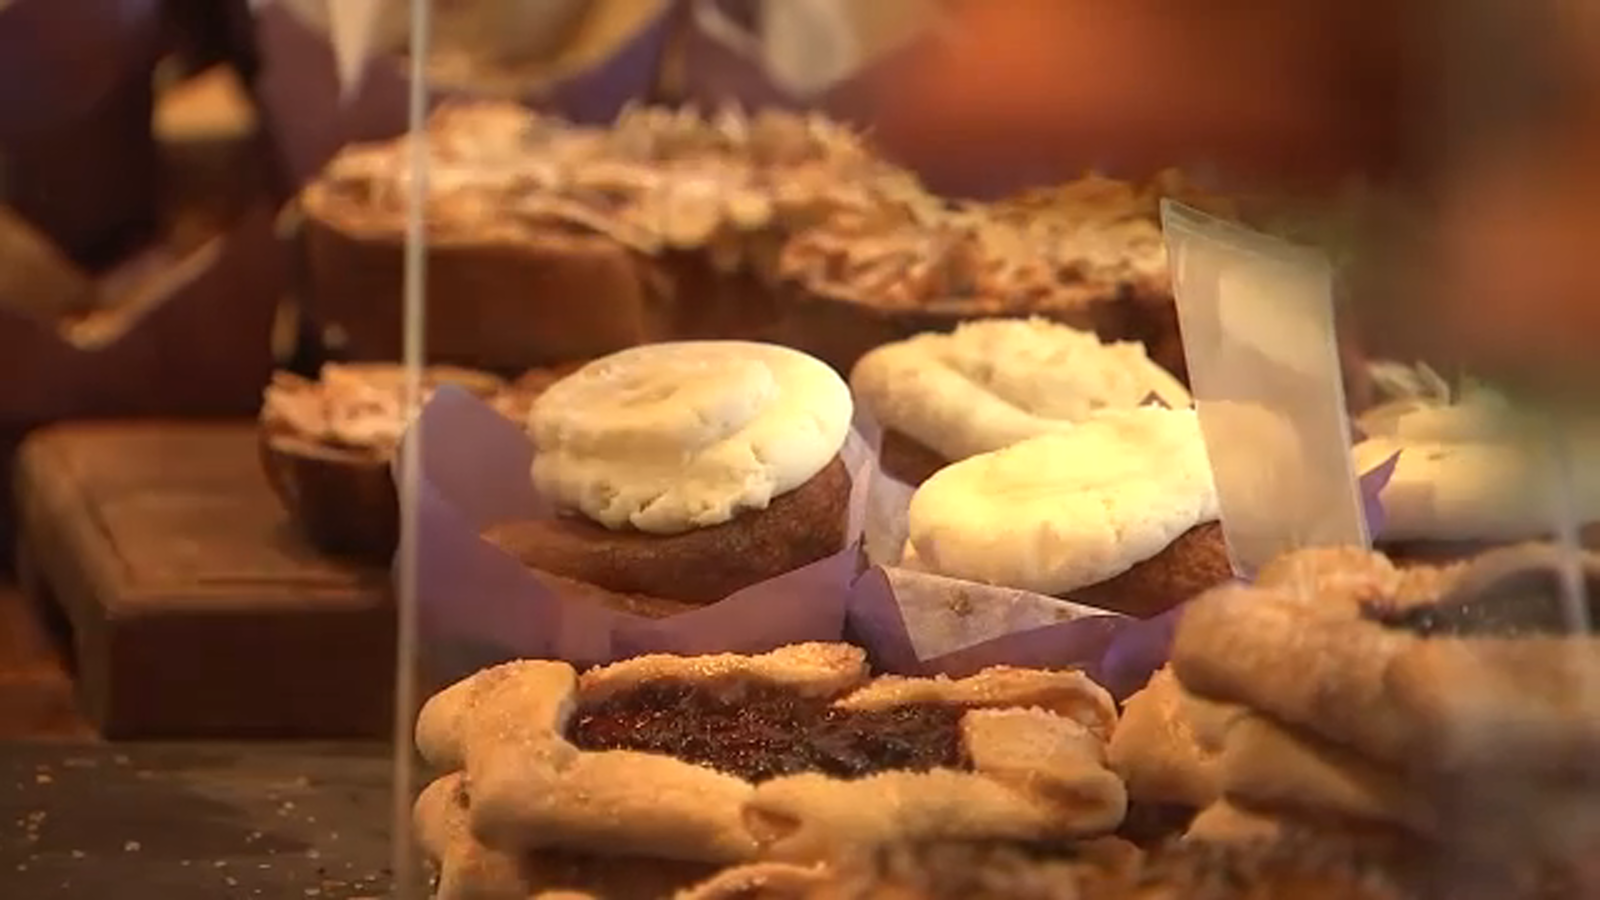 Evanston, Illinois residents line up at Hewn Bakery on Central Street to grab delicious Mother’s Day treats [Video]